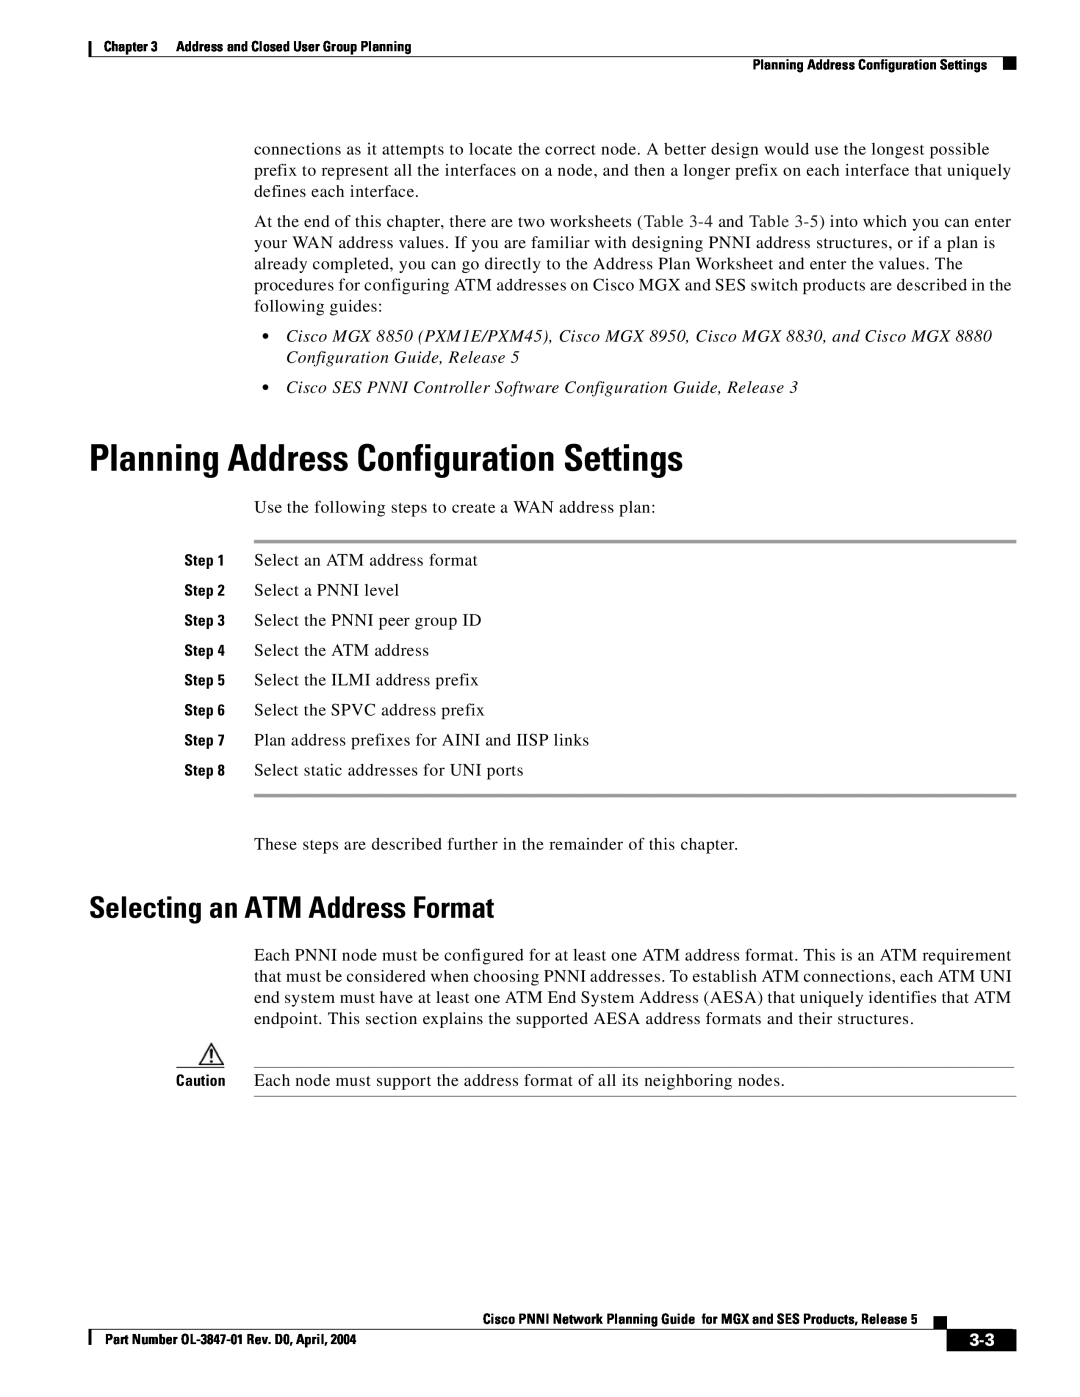 Cisco Systems Network Router manual Planning Address Configuration Settings, Selecting an ATM Address Format 